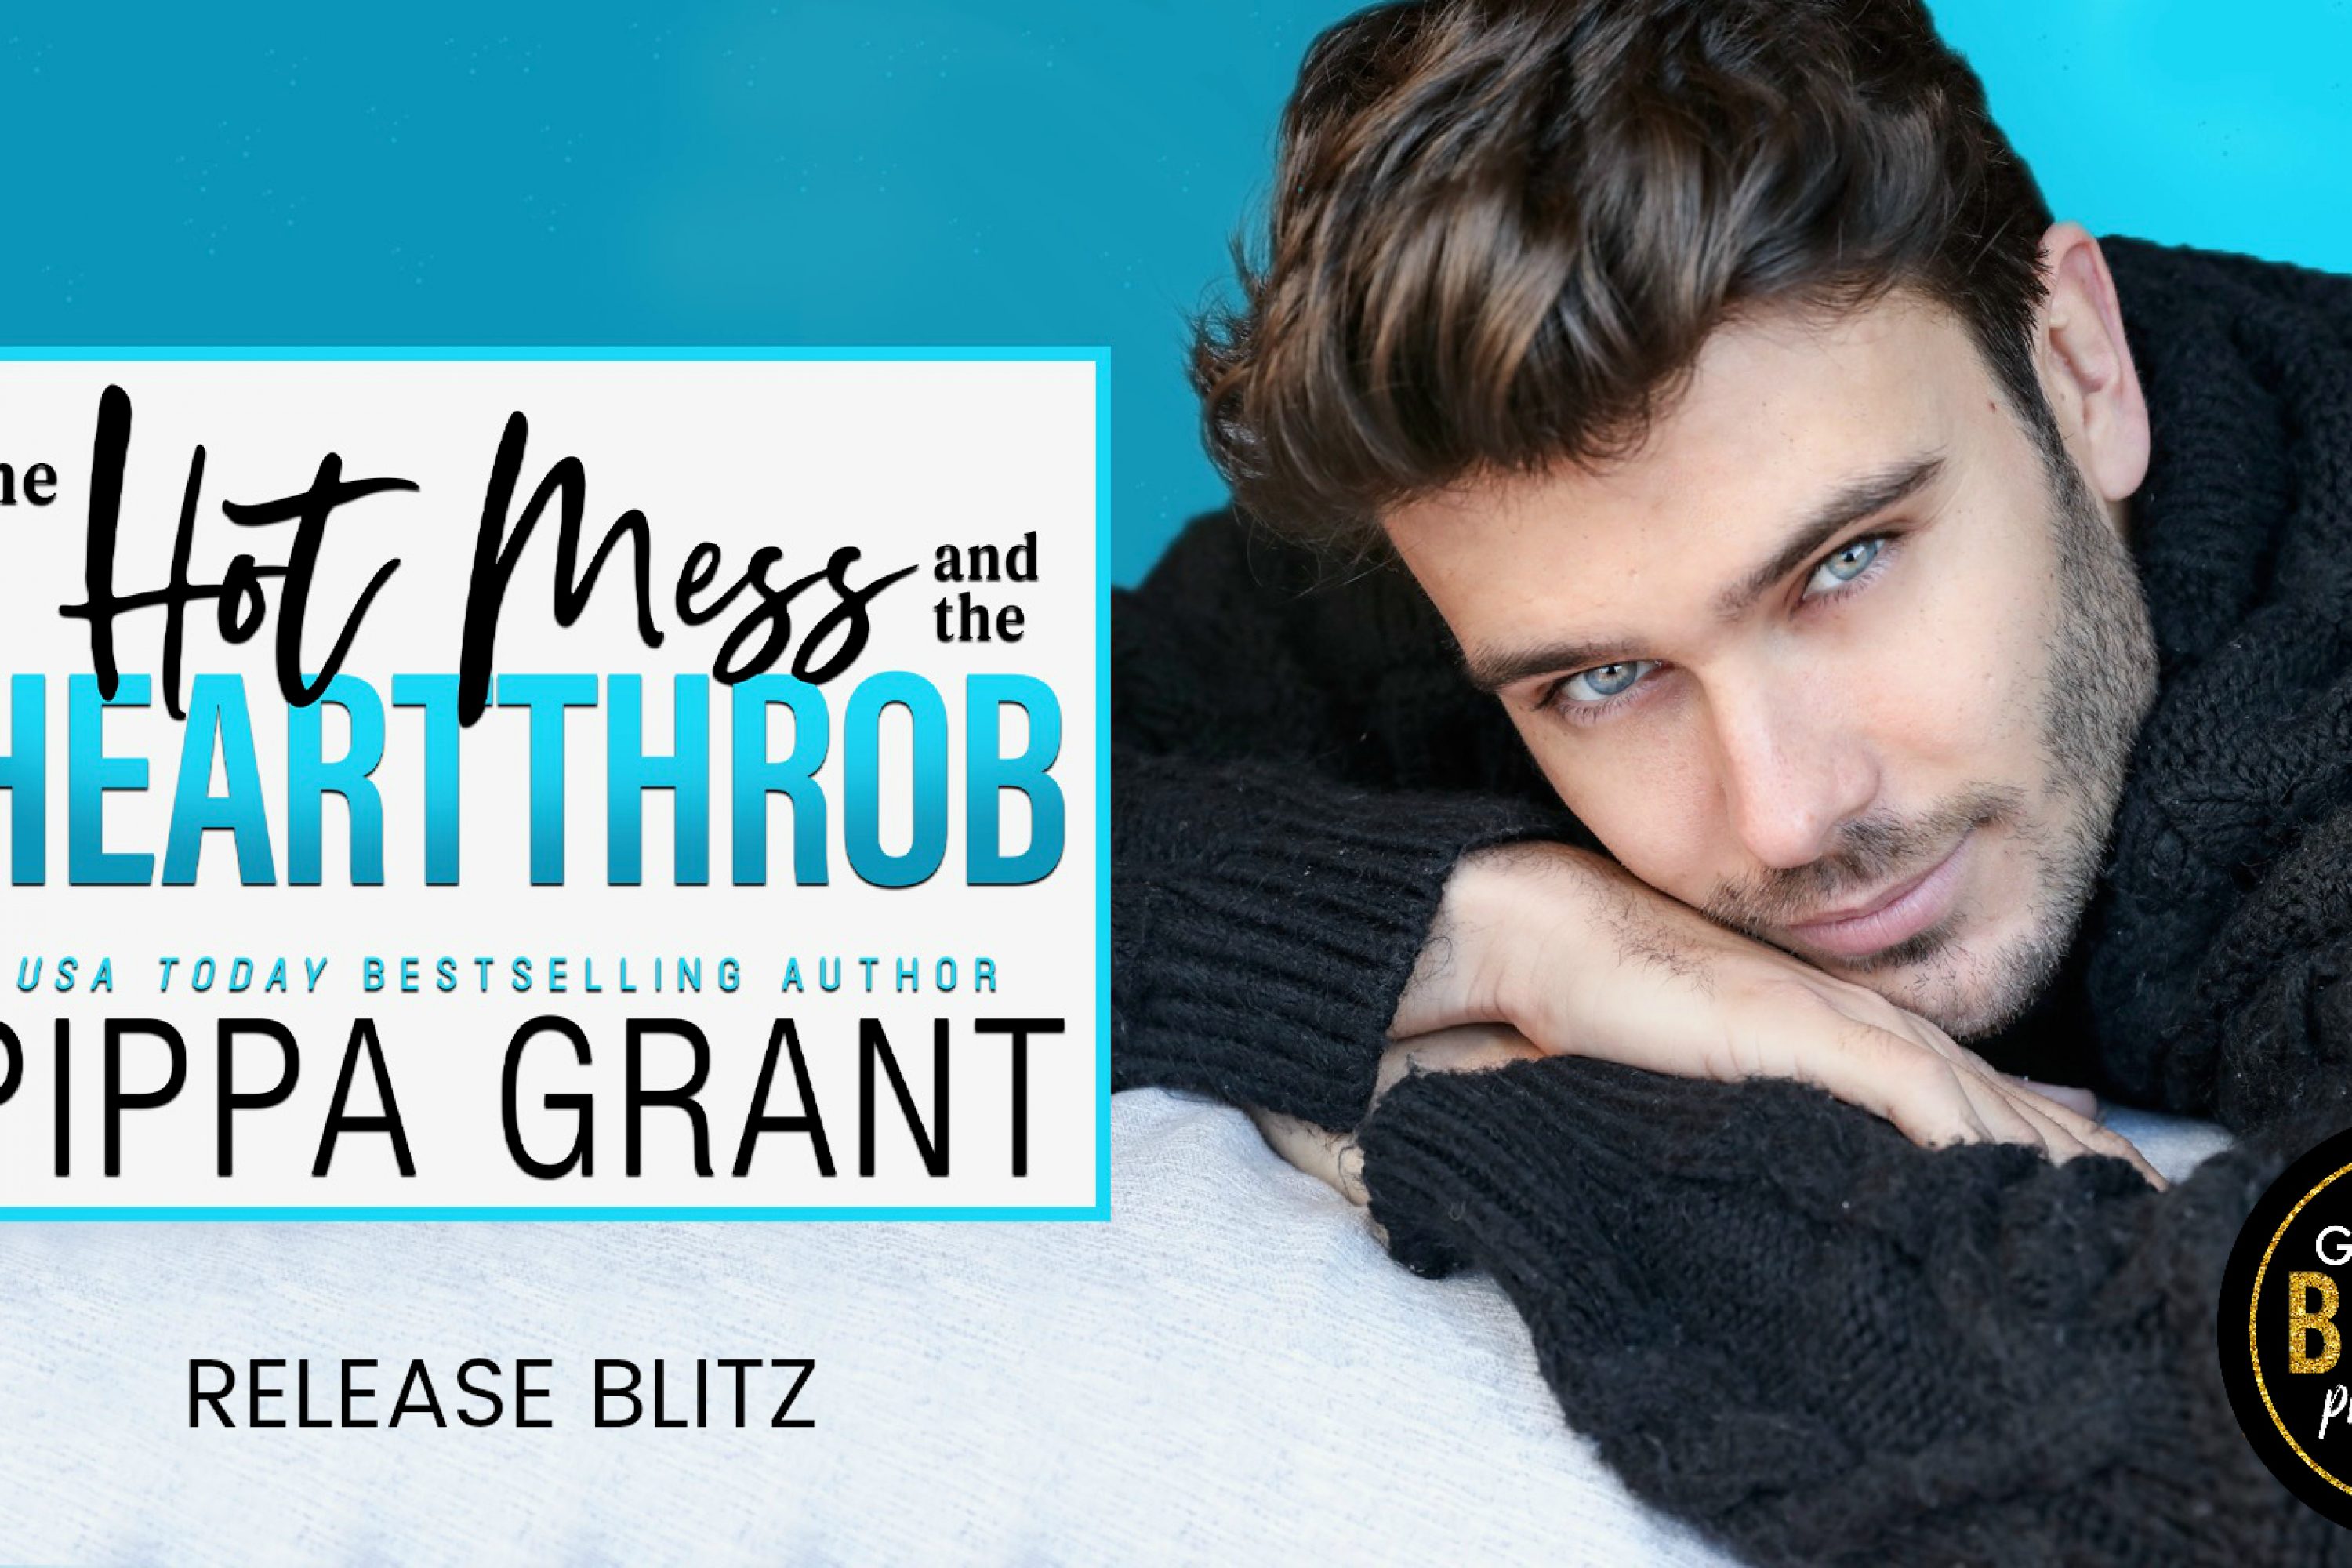 Release Blitz: The Hot Mess and the Heartthrob by Pippa Grant